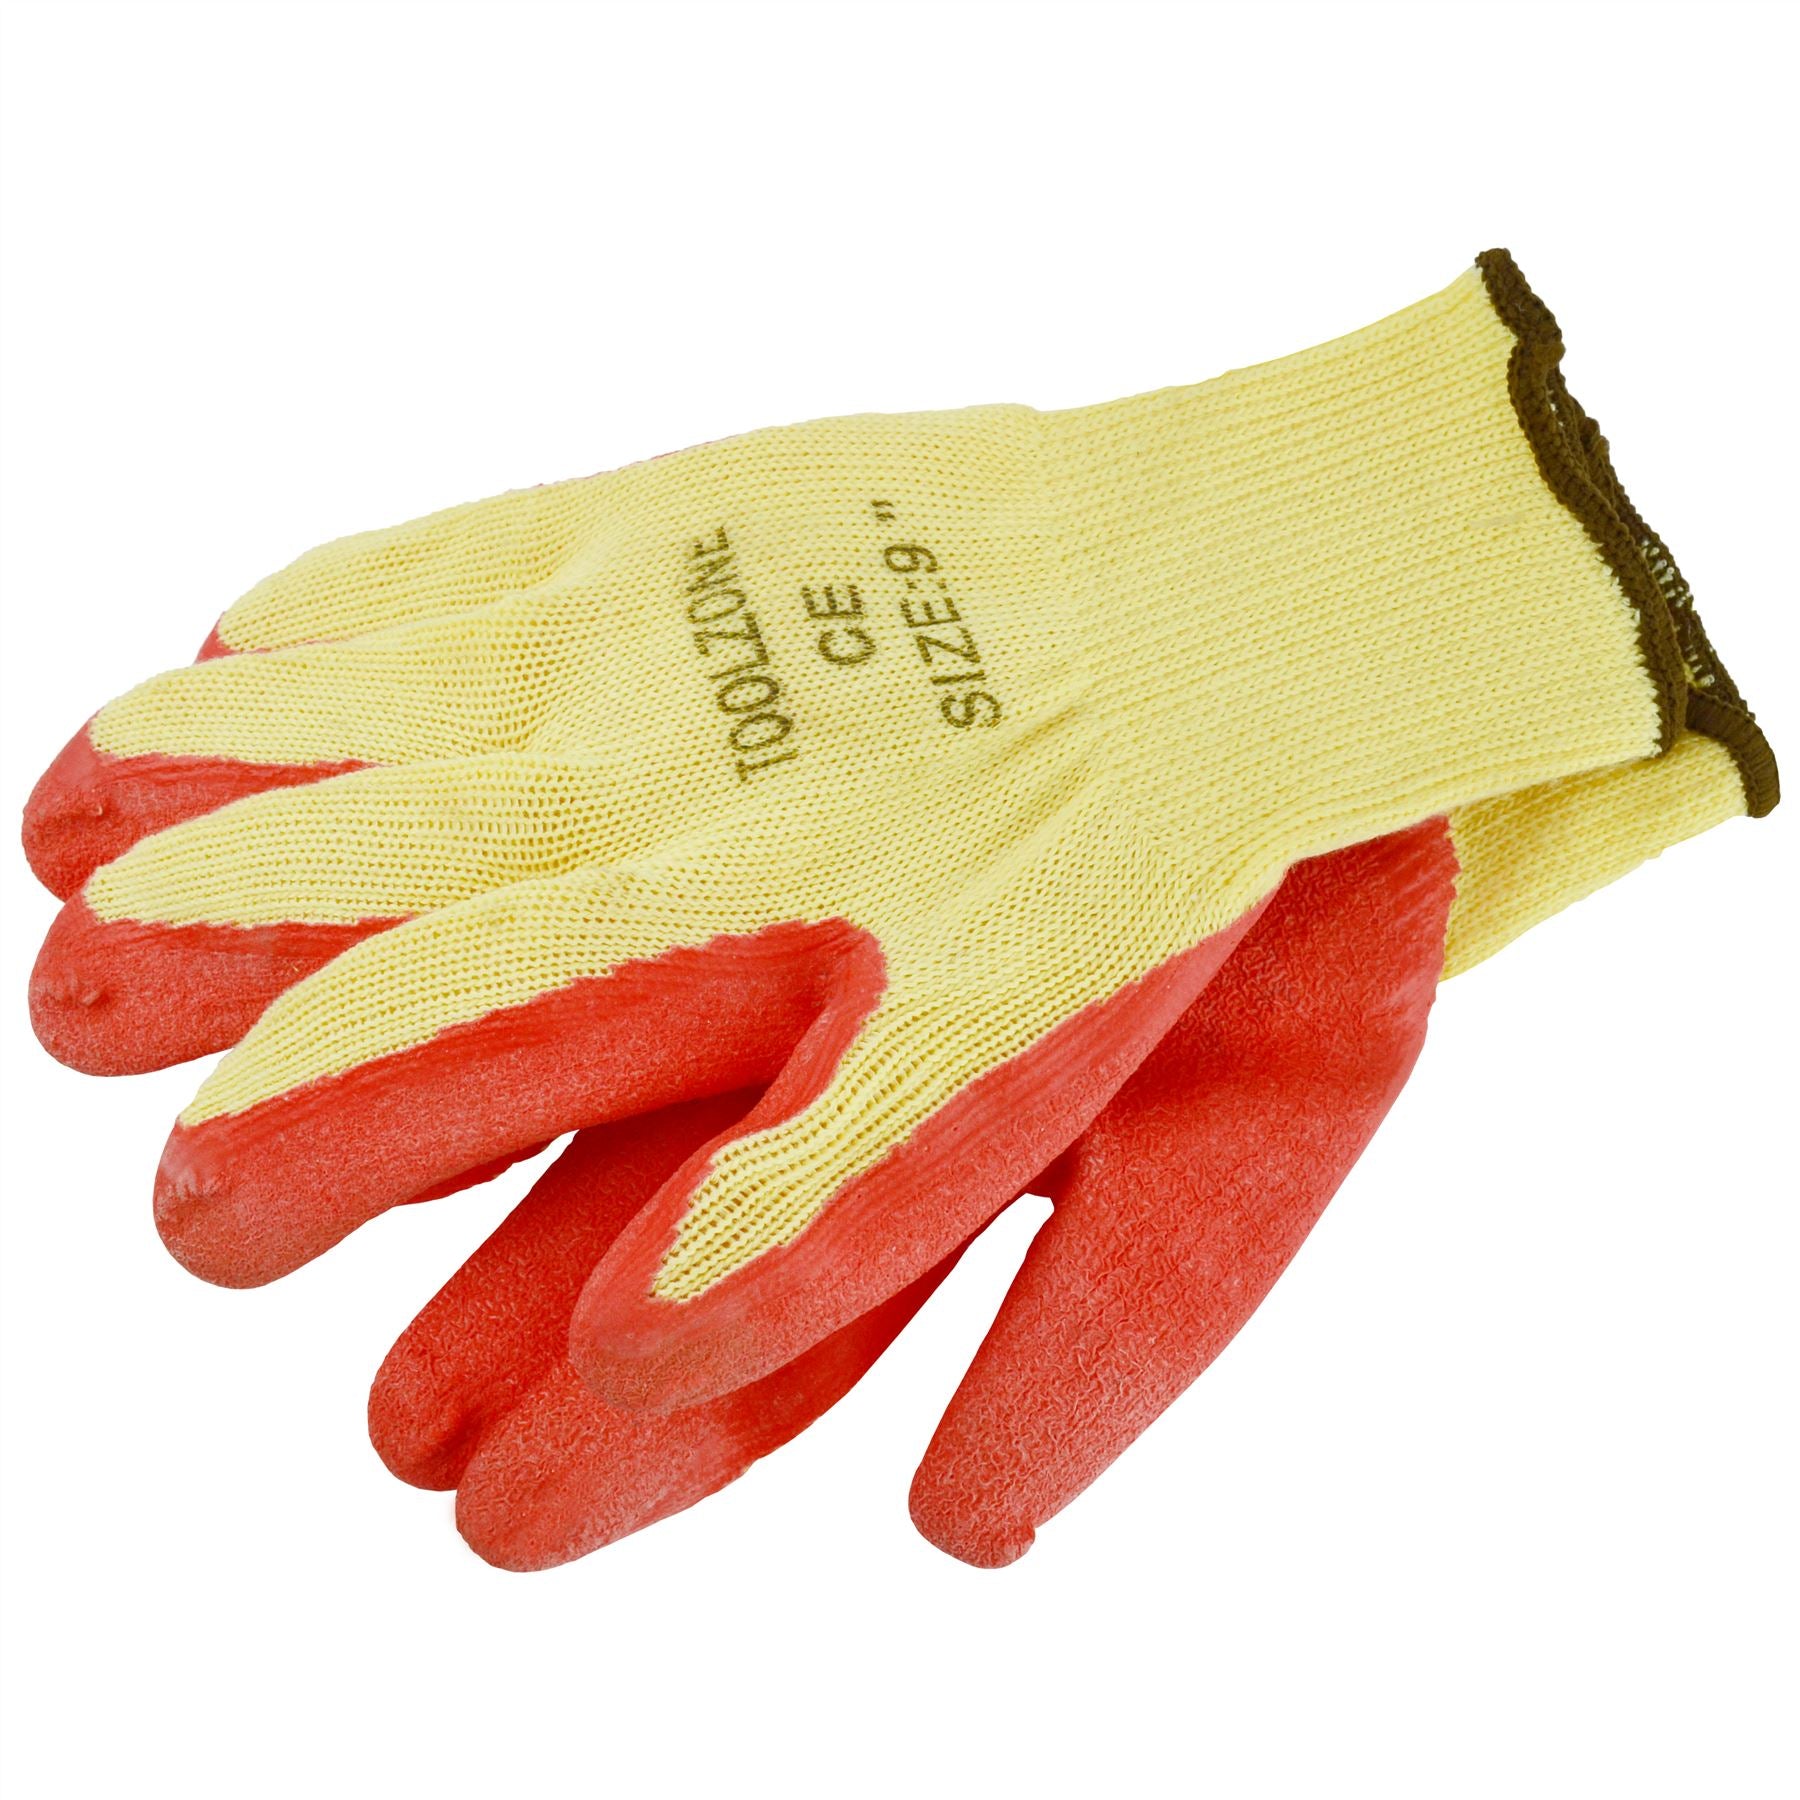 9" Builders Protective Gardening DIY Latex Rubber Coated Work Gloves